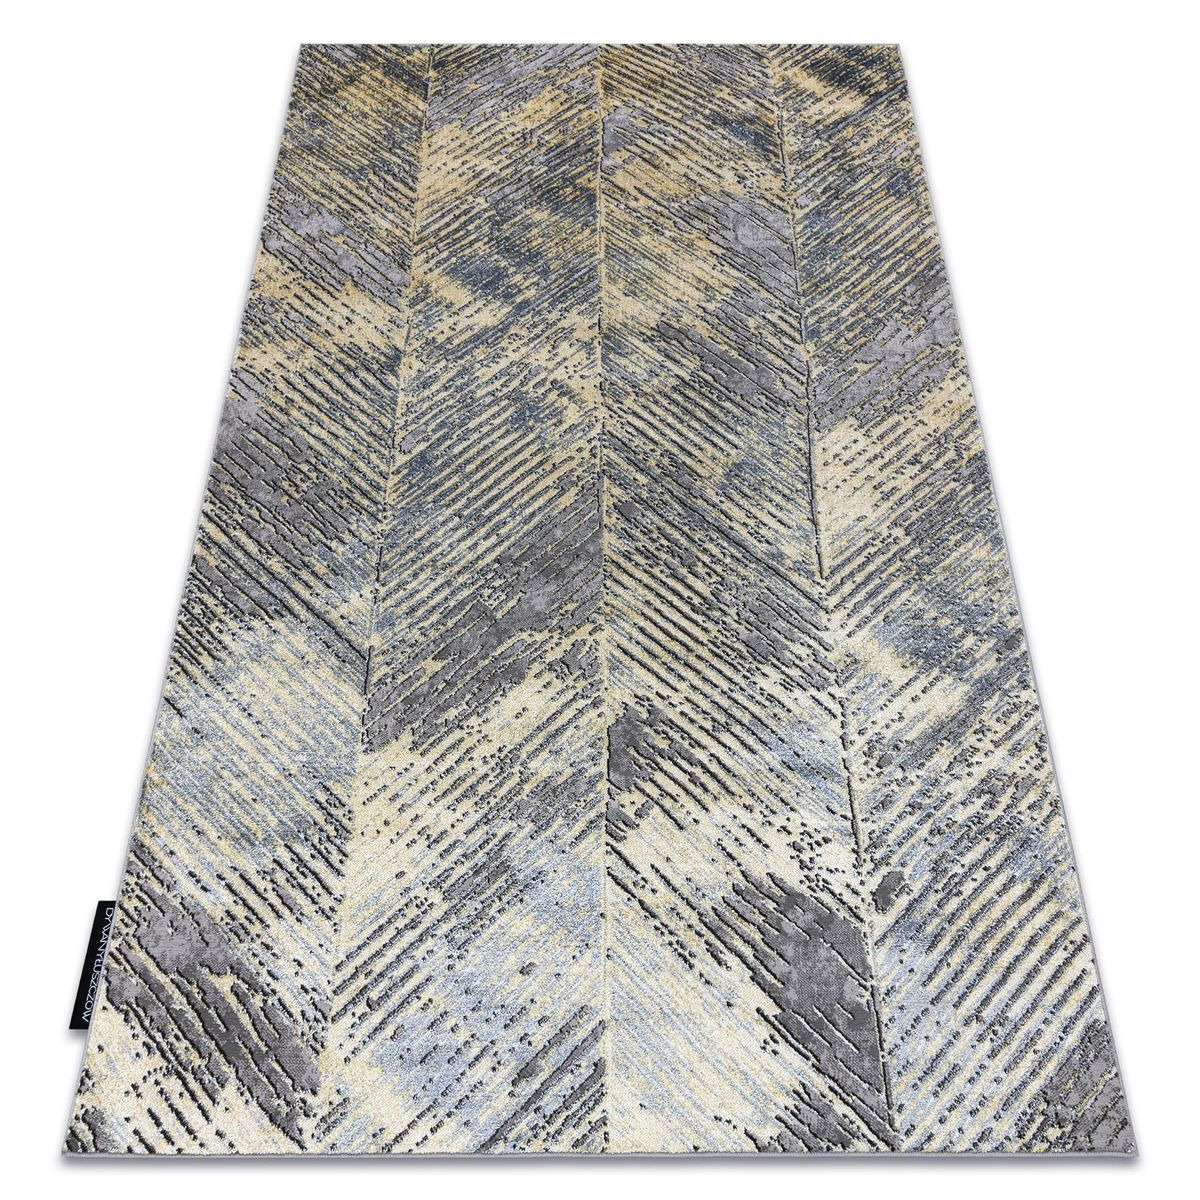 King Cookaric And Vintage Rug Gold Grey, 120x170 cm - image 1